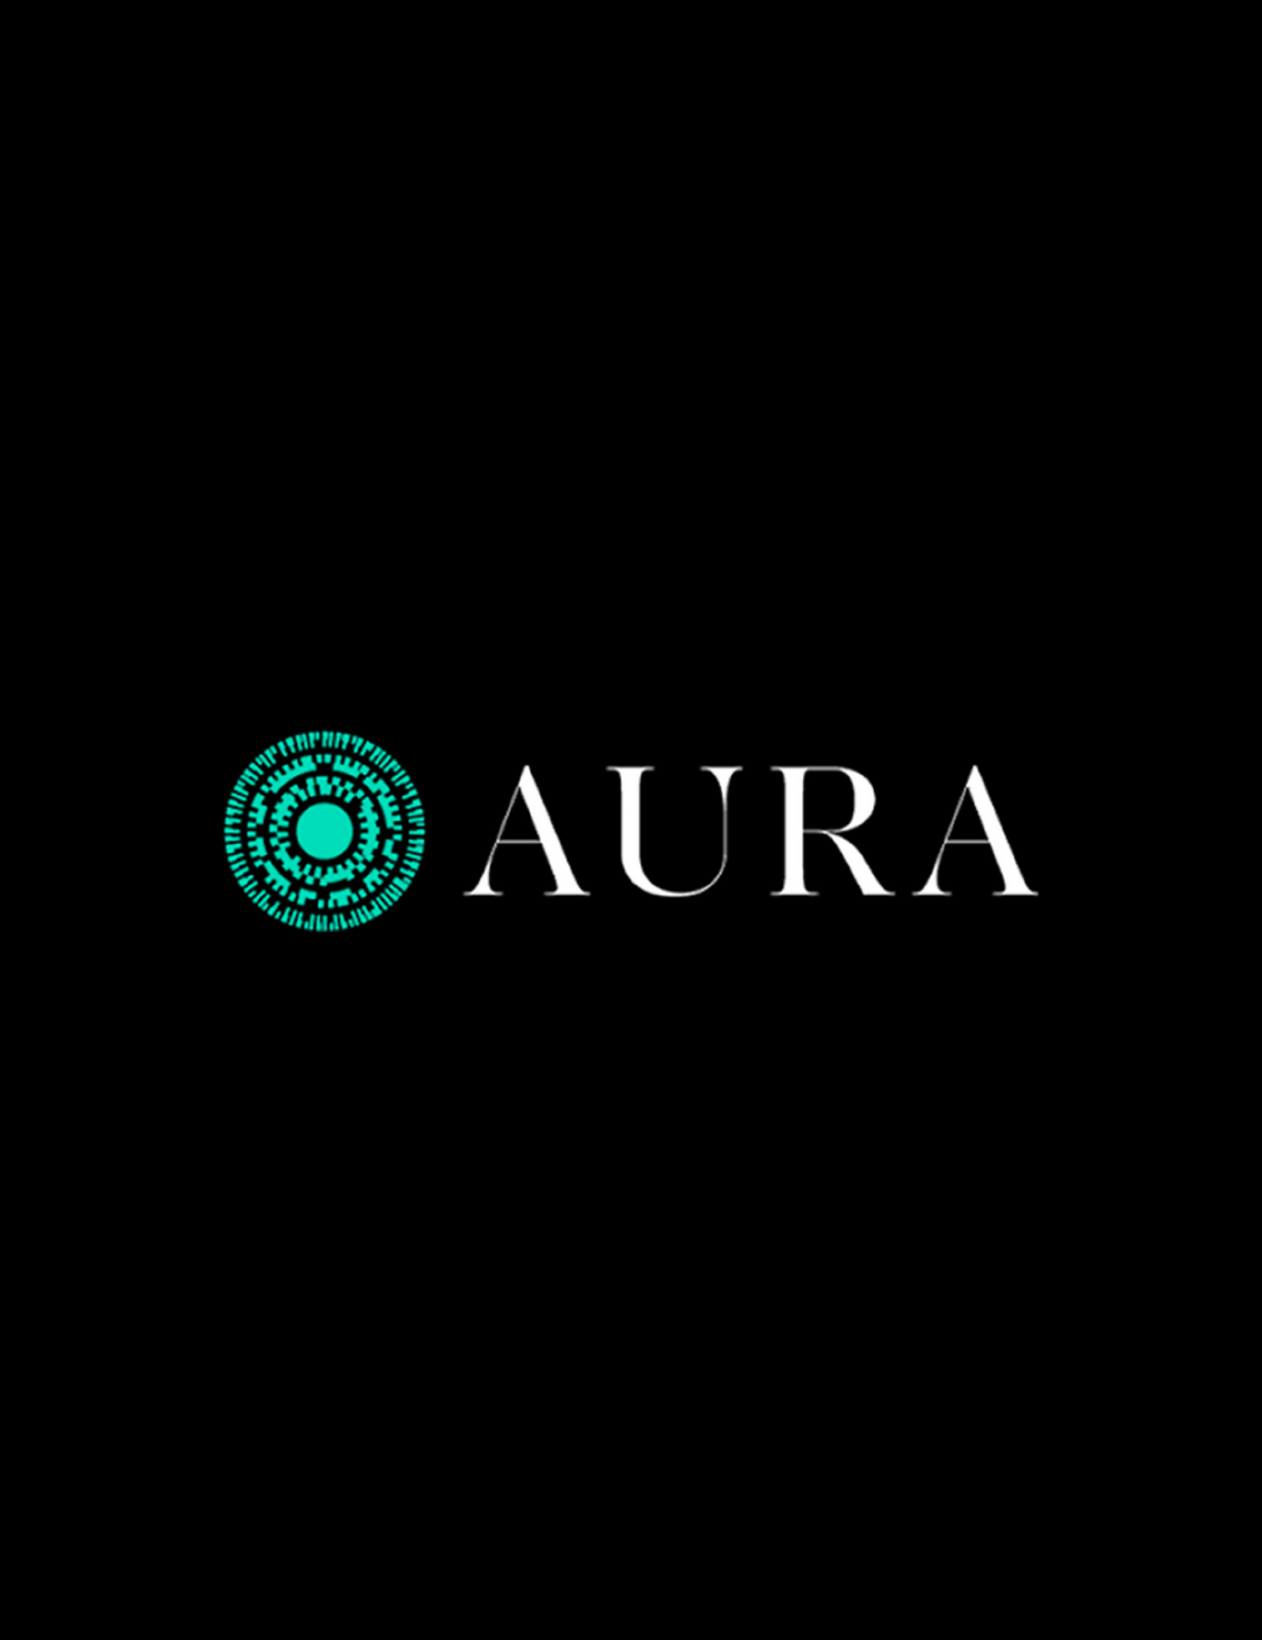 Aura Blockchain Consortium joins the Prince of Wales’ initiative